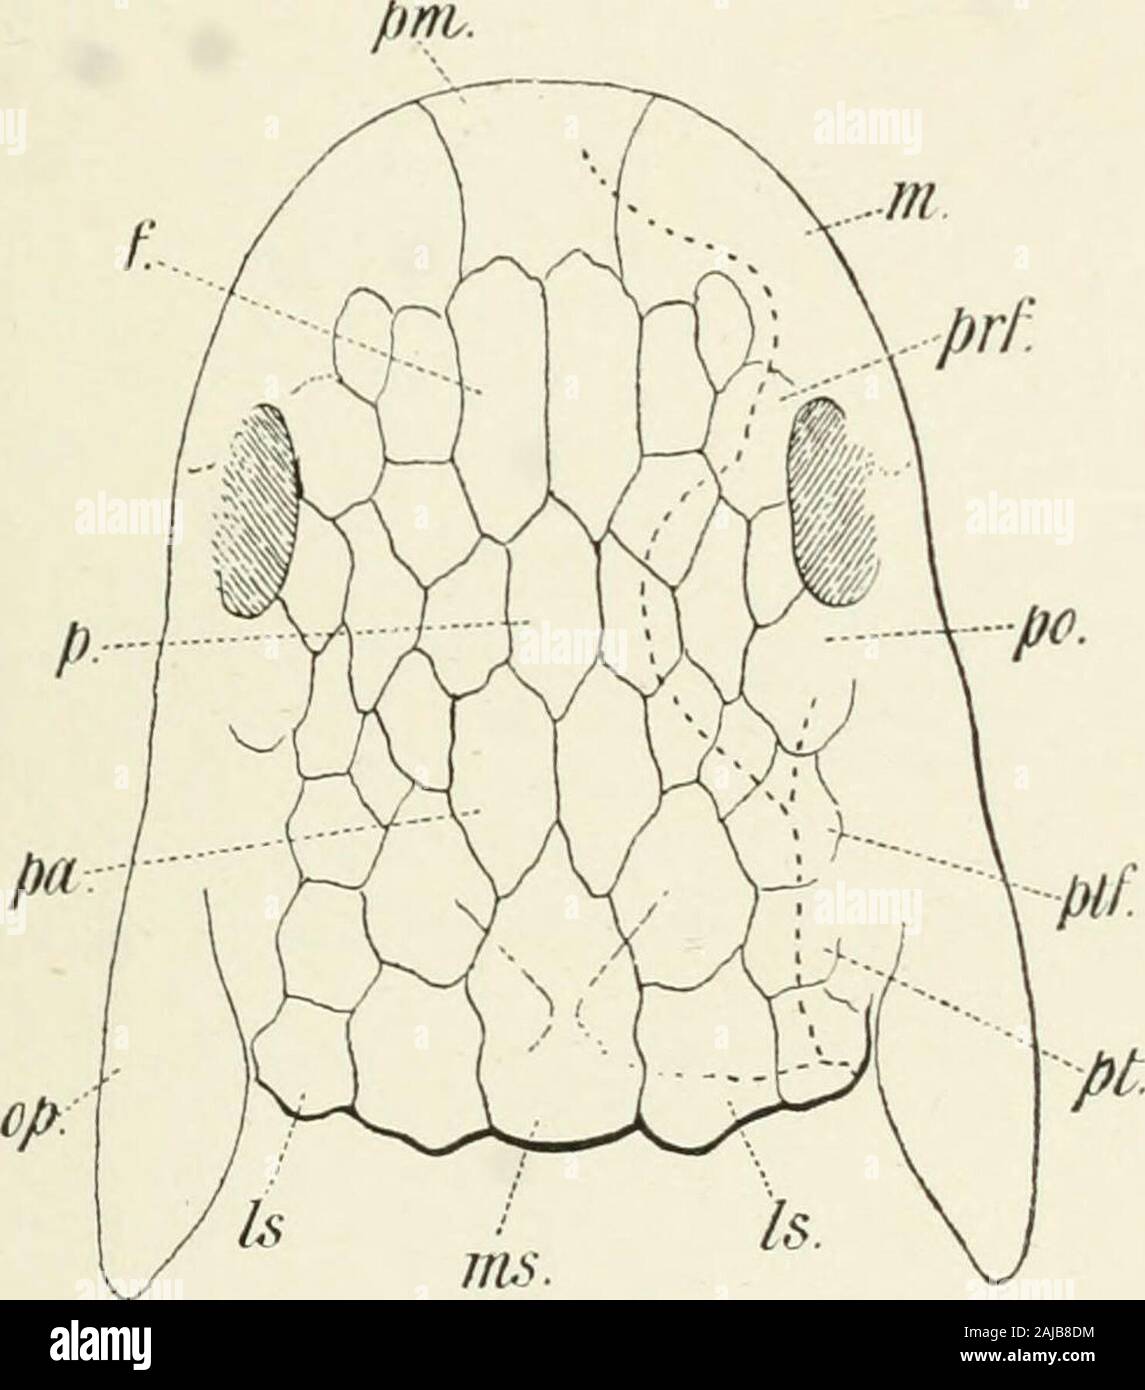 A treatise on zoology . Dipnoi (Fig. 97). The Dipneumones differ from Ceratodus chiefly in the furthermodification of the dermal bones. The postorbitals and suborbitalsare gone. The ethmoid remains in front, and a large medianbone lying on the chondrocranium, and partly below the muscles,probably represents the occipital. The laterals project freelybehind over the muscles (Fig. 211). It is obvious that the cranialbones of the modern Dipnoi arc in a very specialised condition. TEETH 241 The nostrils in all Dipnoi are on the ventral surface of the snout.There are separate anterior or external na Stock Photo